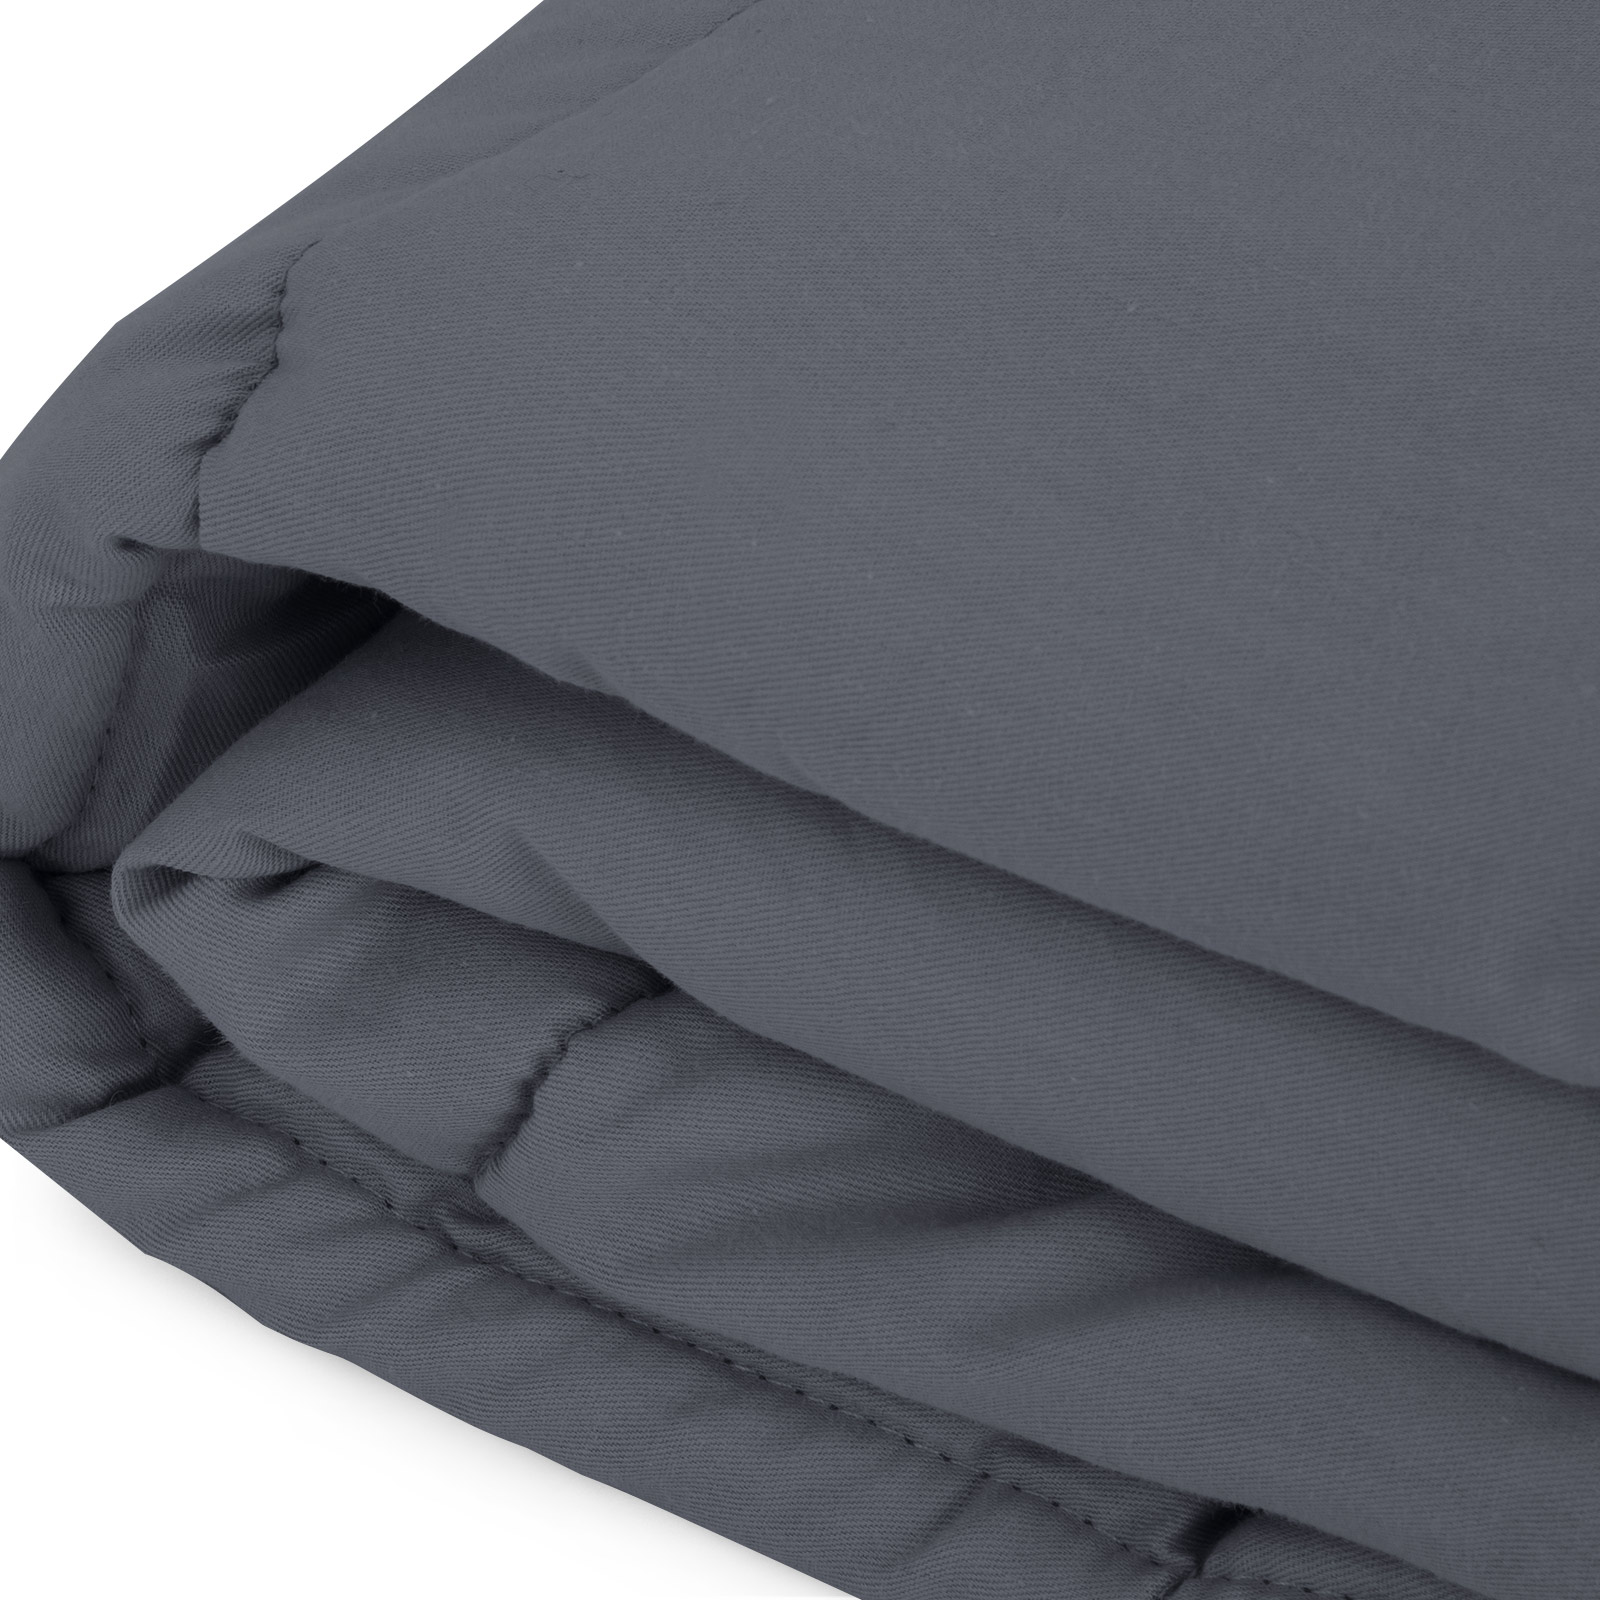 Heavy Weighted Blanket Adult Sleep Better Stress Anxiety ADHD 60" x 80